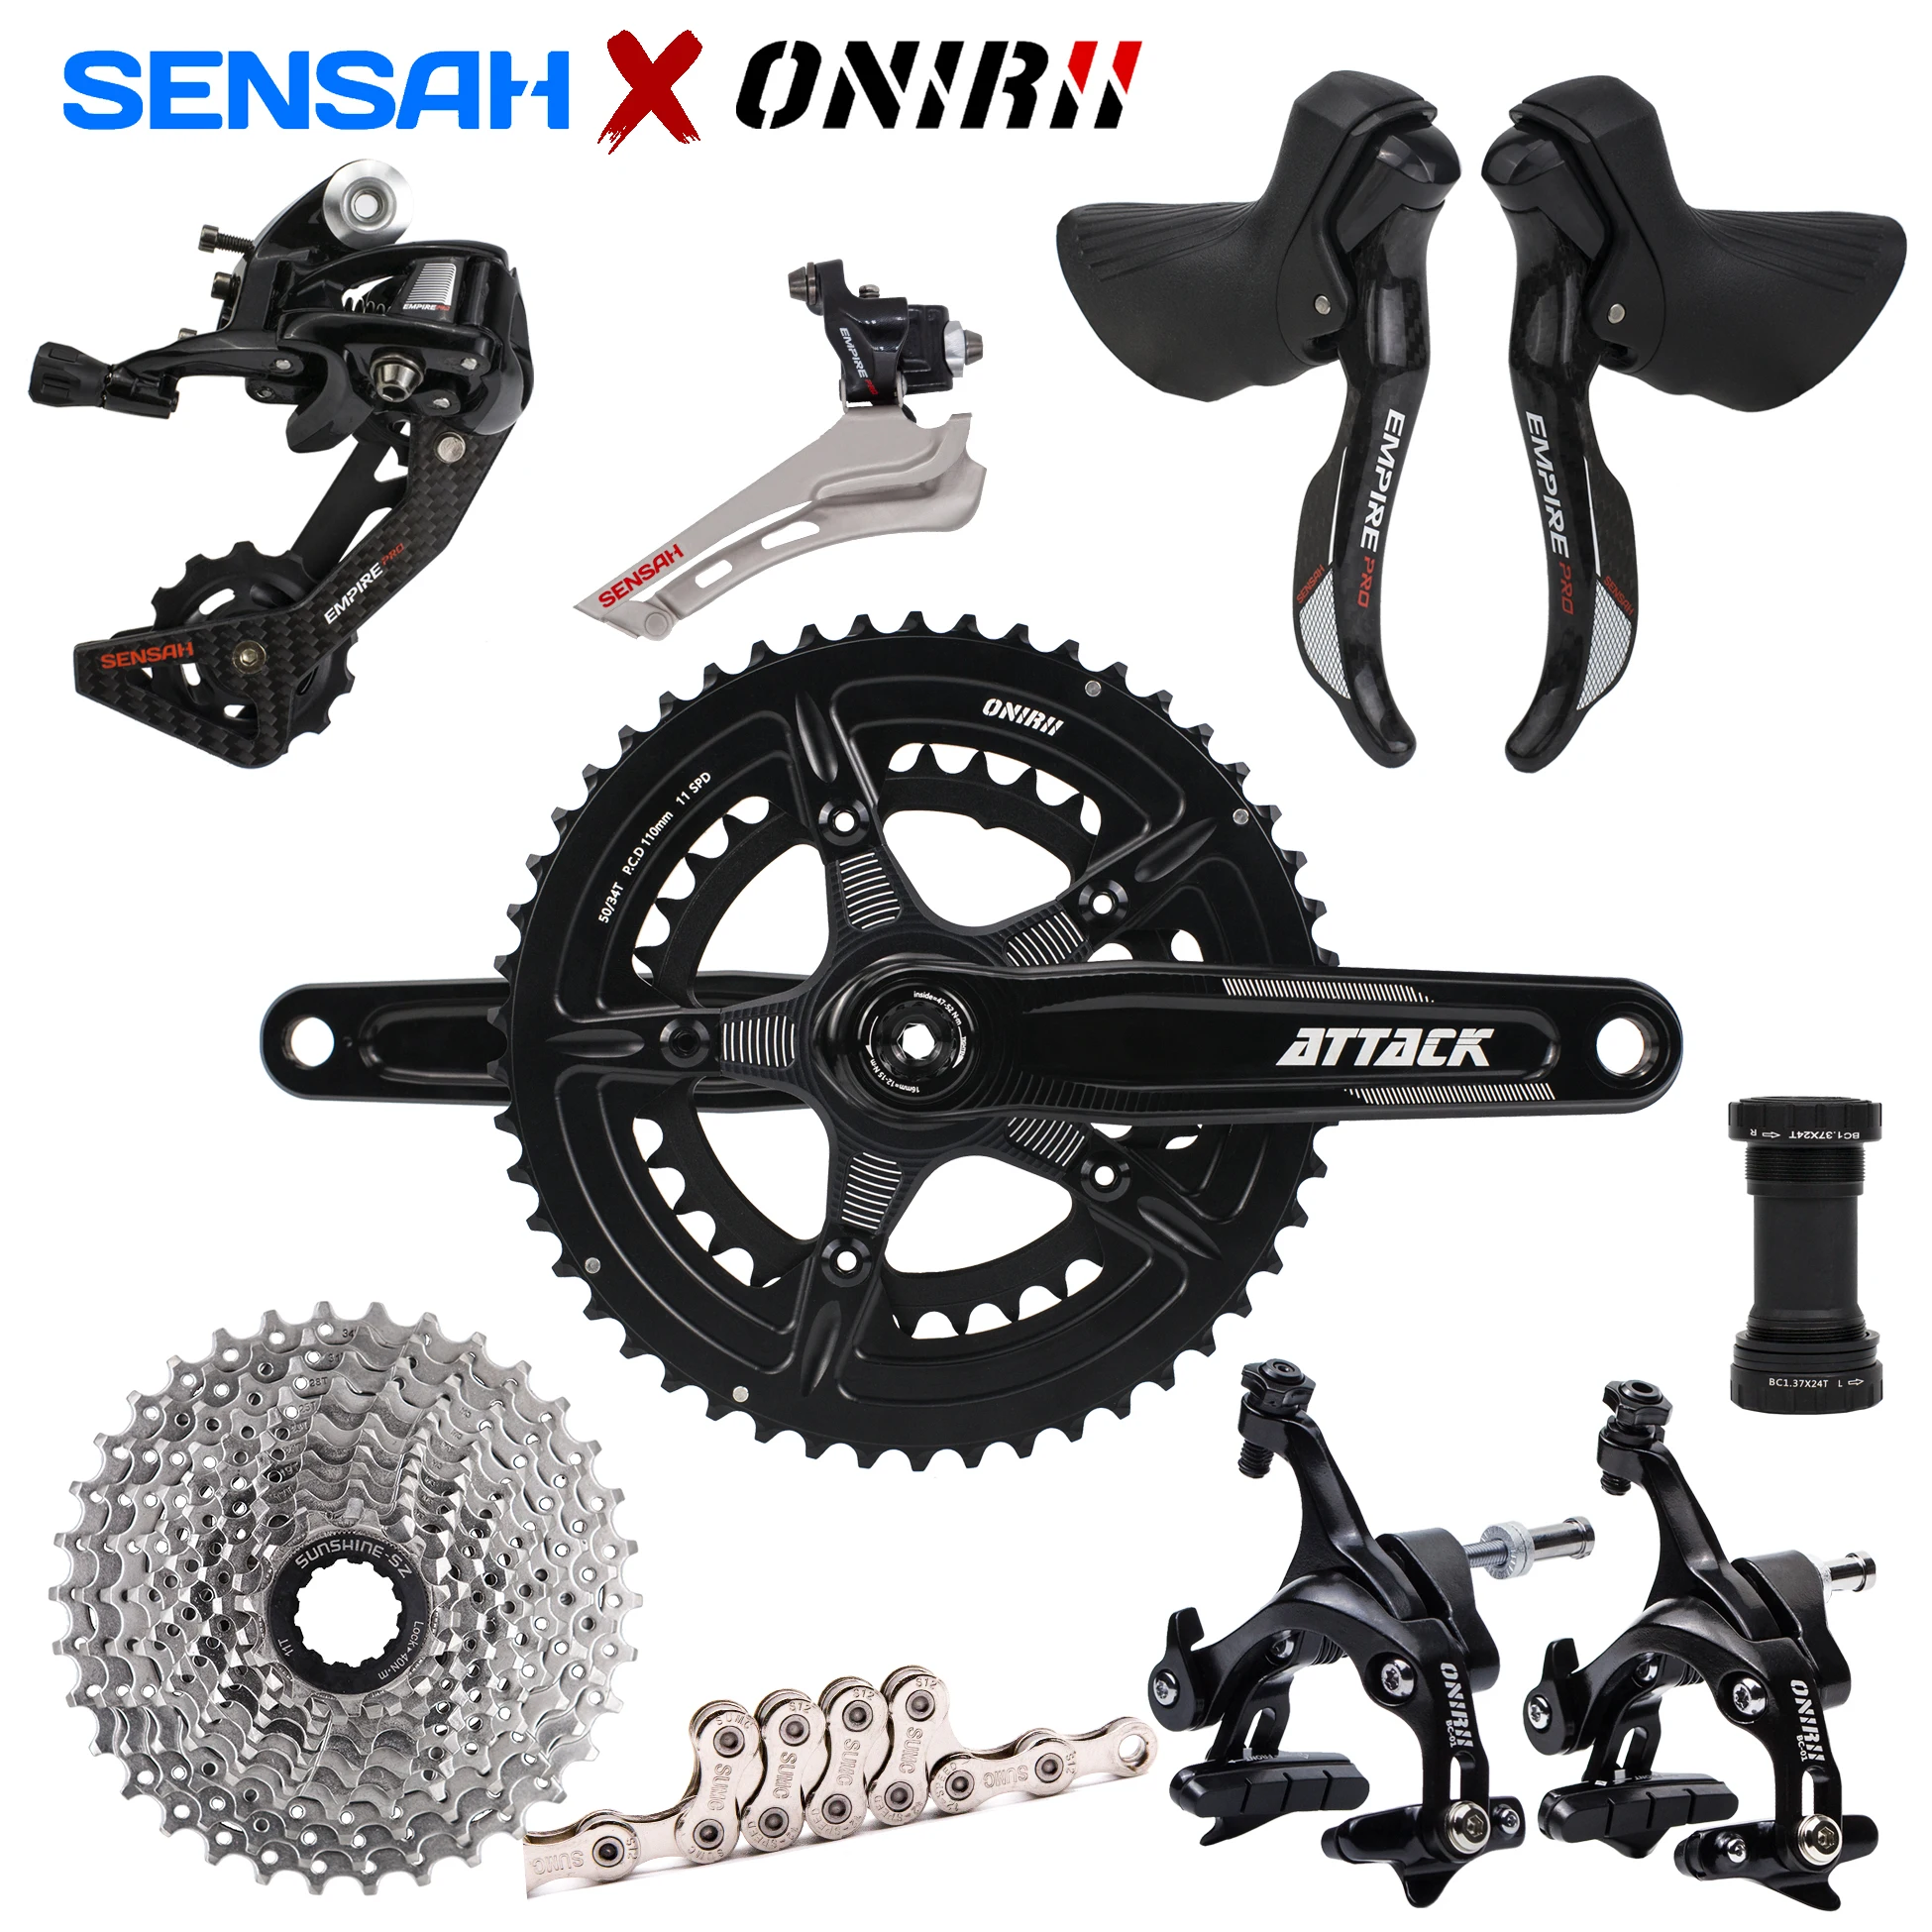 

SENSAH EMPIRE PRO 2x12 Speed 24s Road Bicycle Groupset Cycling Carbon Shifter Derailleurs ONIRII Attack Crank Cassette R8000 105